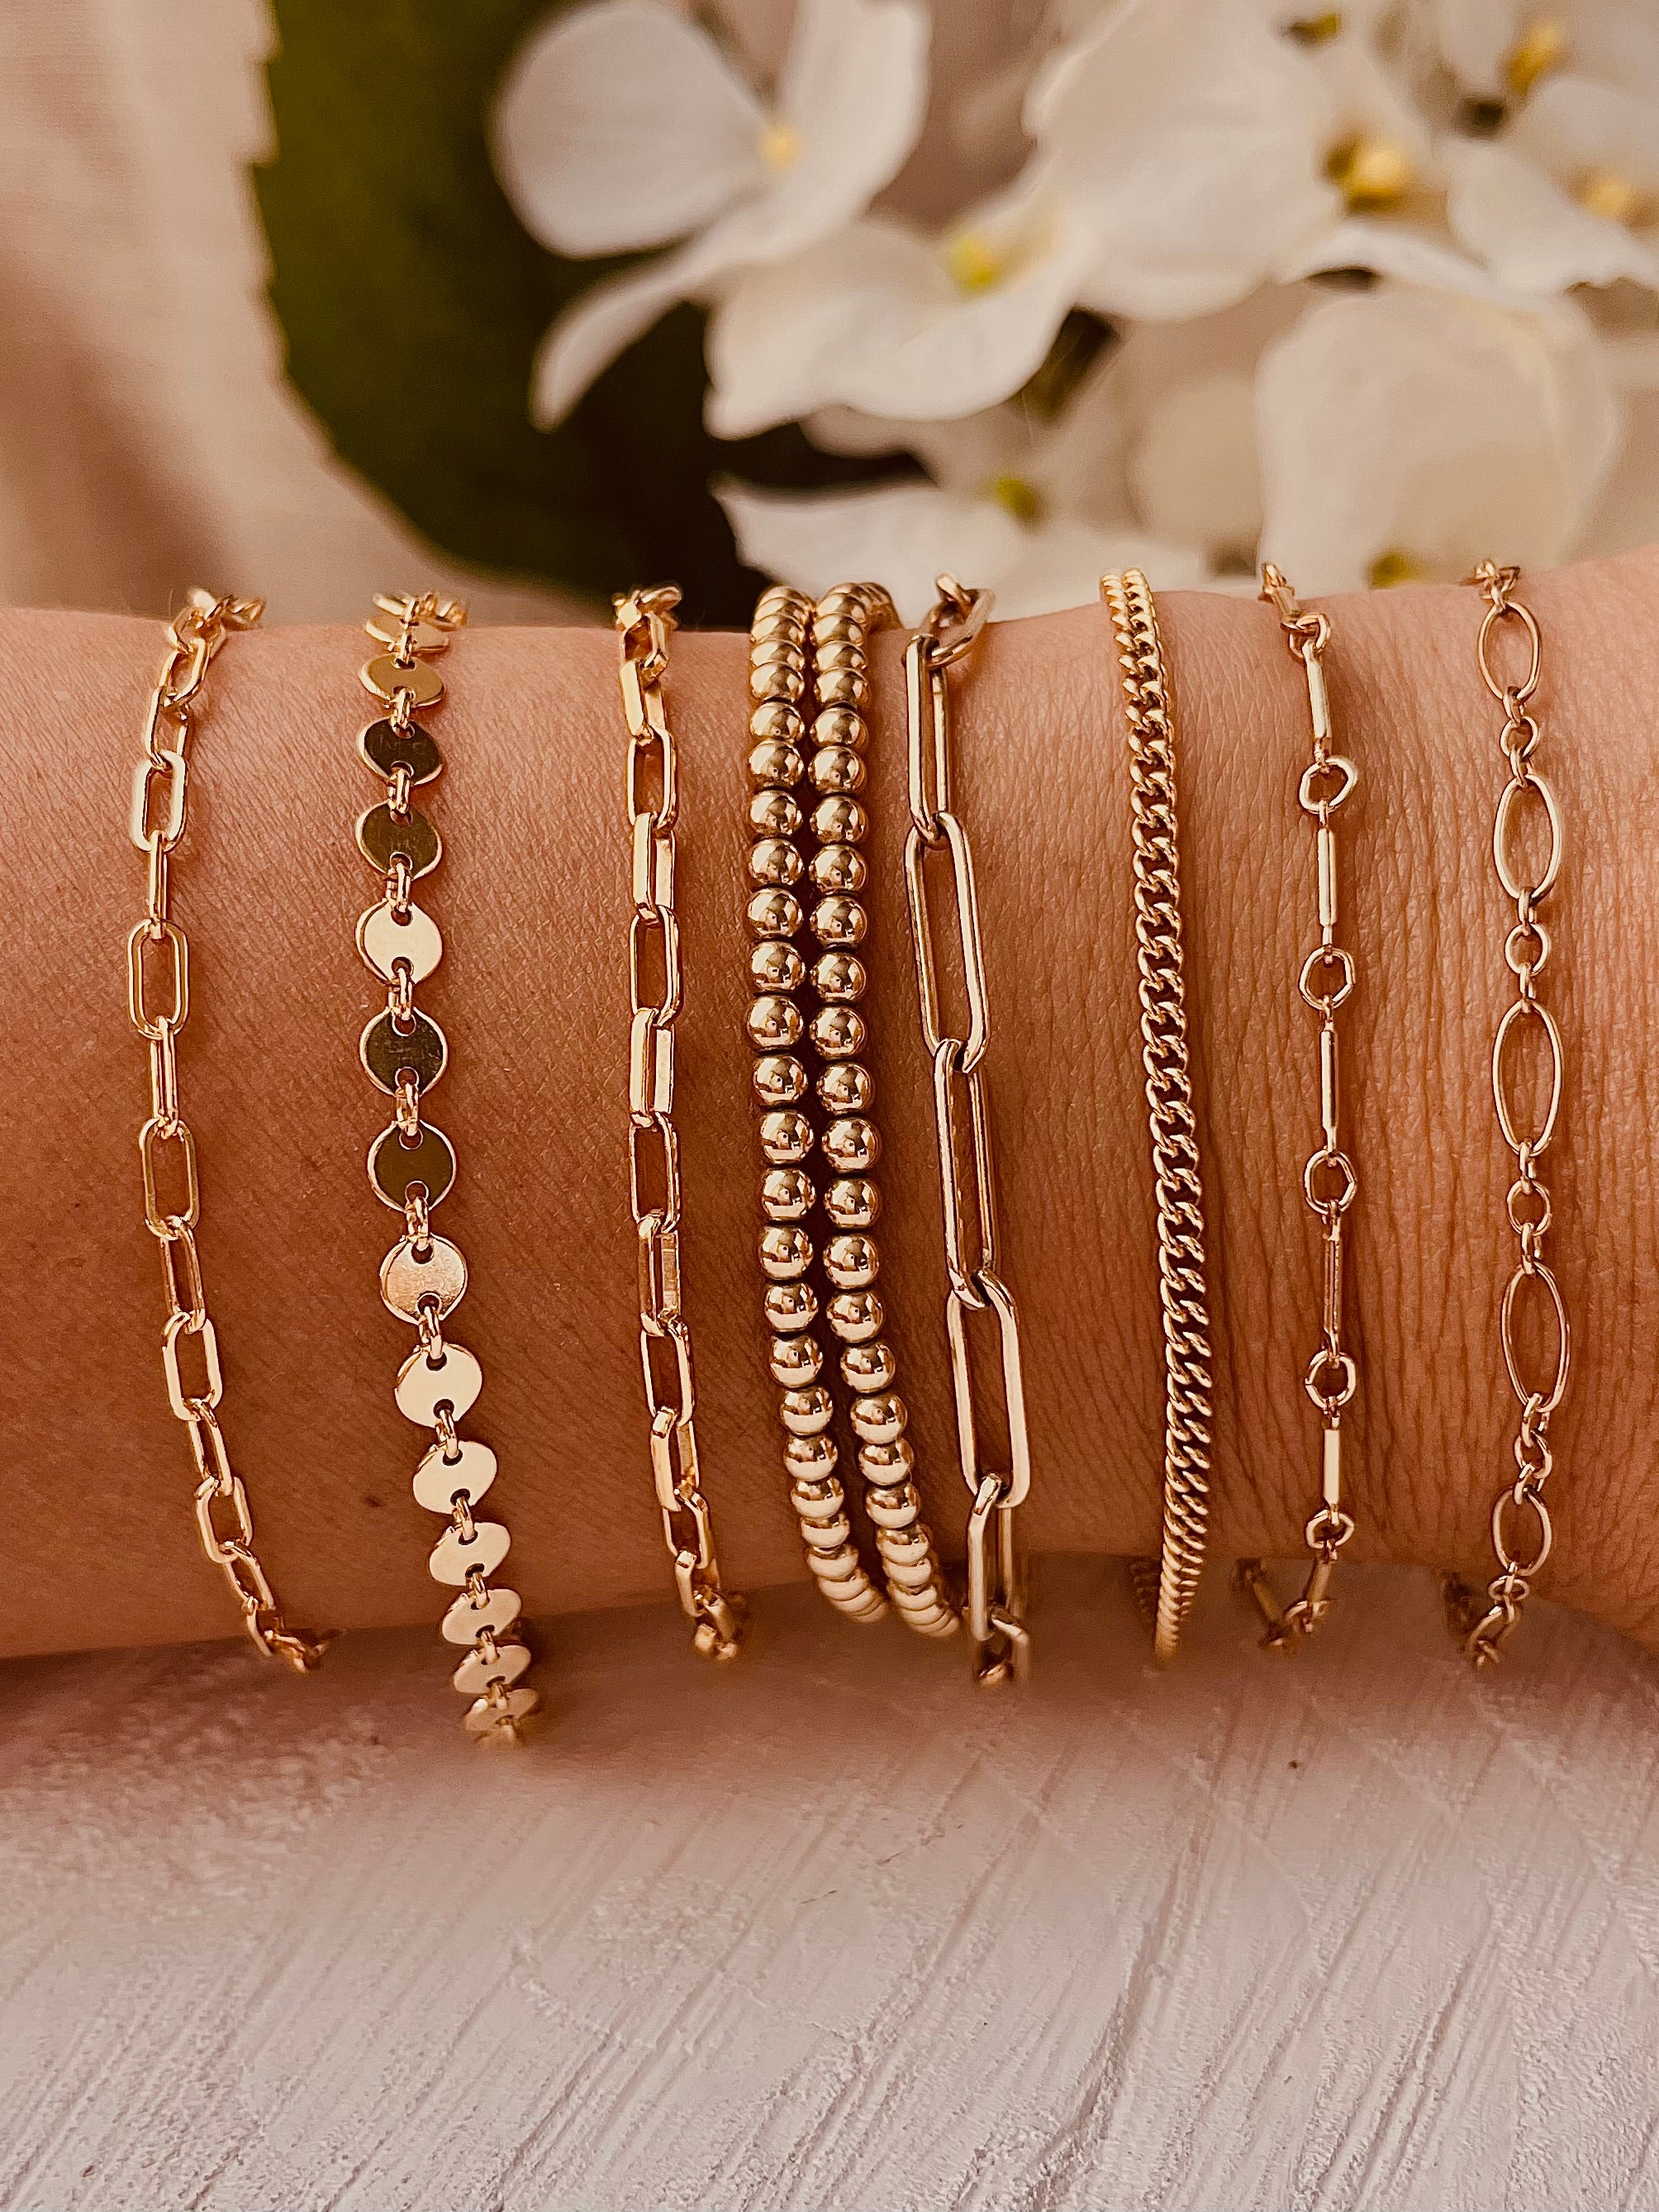 7 Best Gold Bracelet Designs to Spice up Any Outfit in 2023